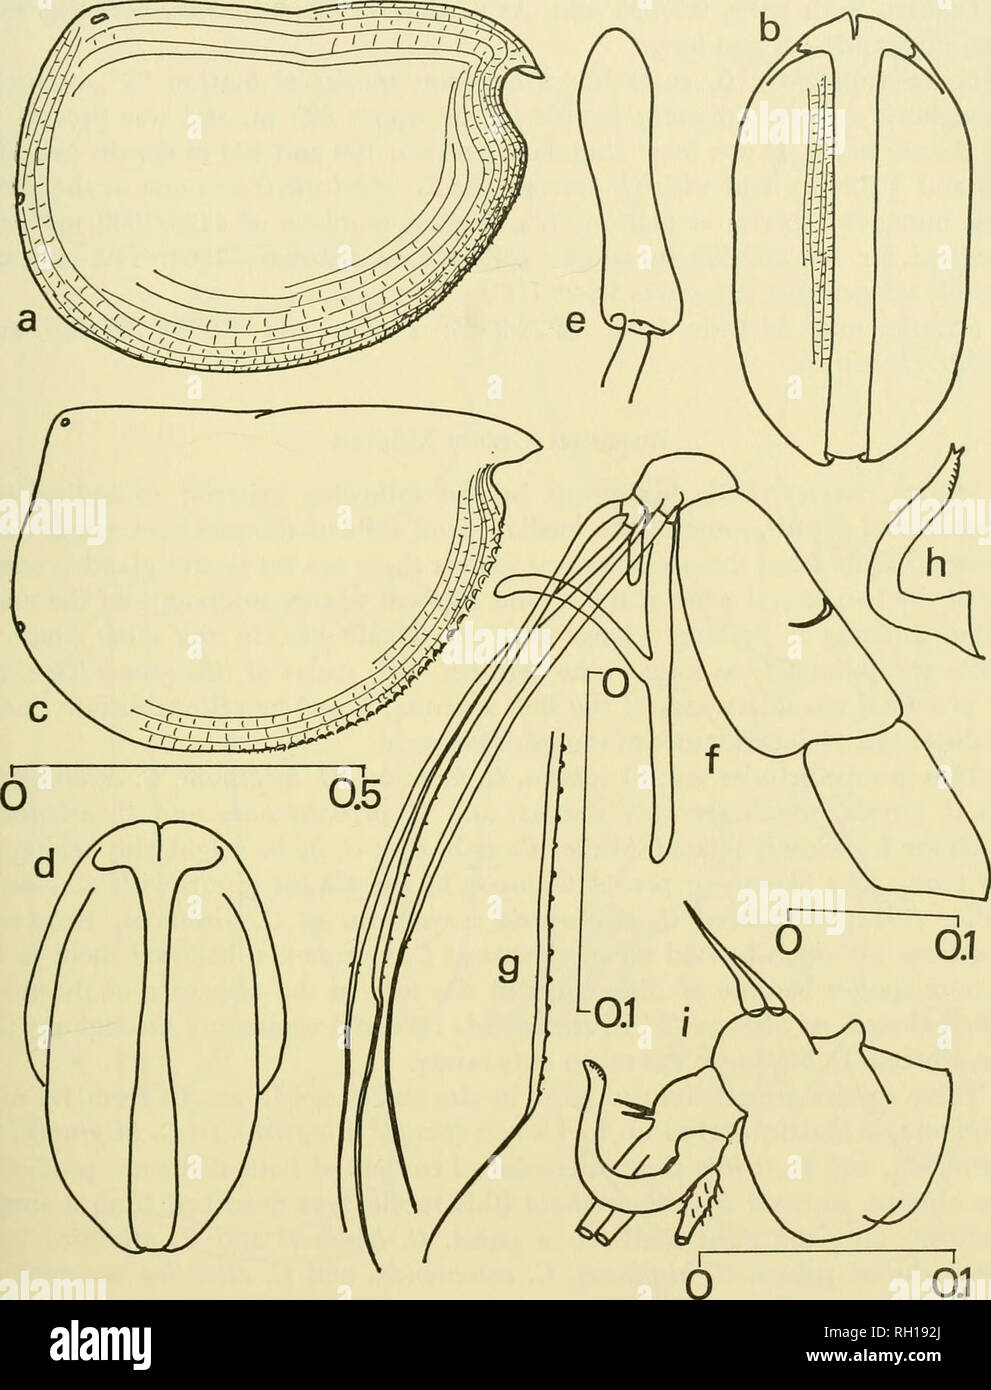 . Bulletin. Natural history; Natuurlijke historie. PELAGIC OSTRACODS OF THE SARGASSO SEA OFF BERMUDA b 61. Figure 26. Conchoecia curta Lubbock, a and b, lateral and ventral views of female, c and d, lateral and ventral views of male, e, capitulum of male frontal organ, f, inale first antenna, g, armature of male principal seta, h, male left clasping organ, i, endopodite of male right second antenna (setae and filaments cut off). Scale at left for a-d; at bottom right for e, h, and i; below f for f; and at center for g. Scales in mm. short spines (Muller), 7-14 (Glaus), and 11-13 (Skogsberg). M Stock Photo